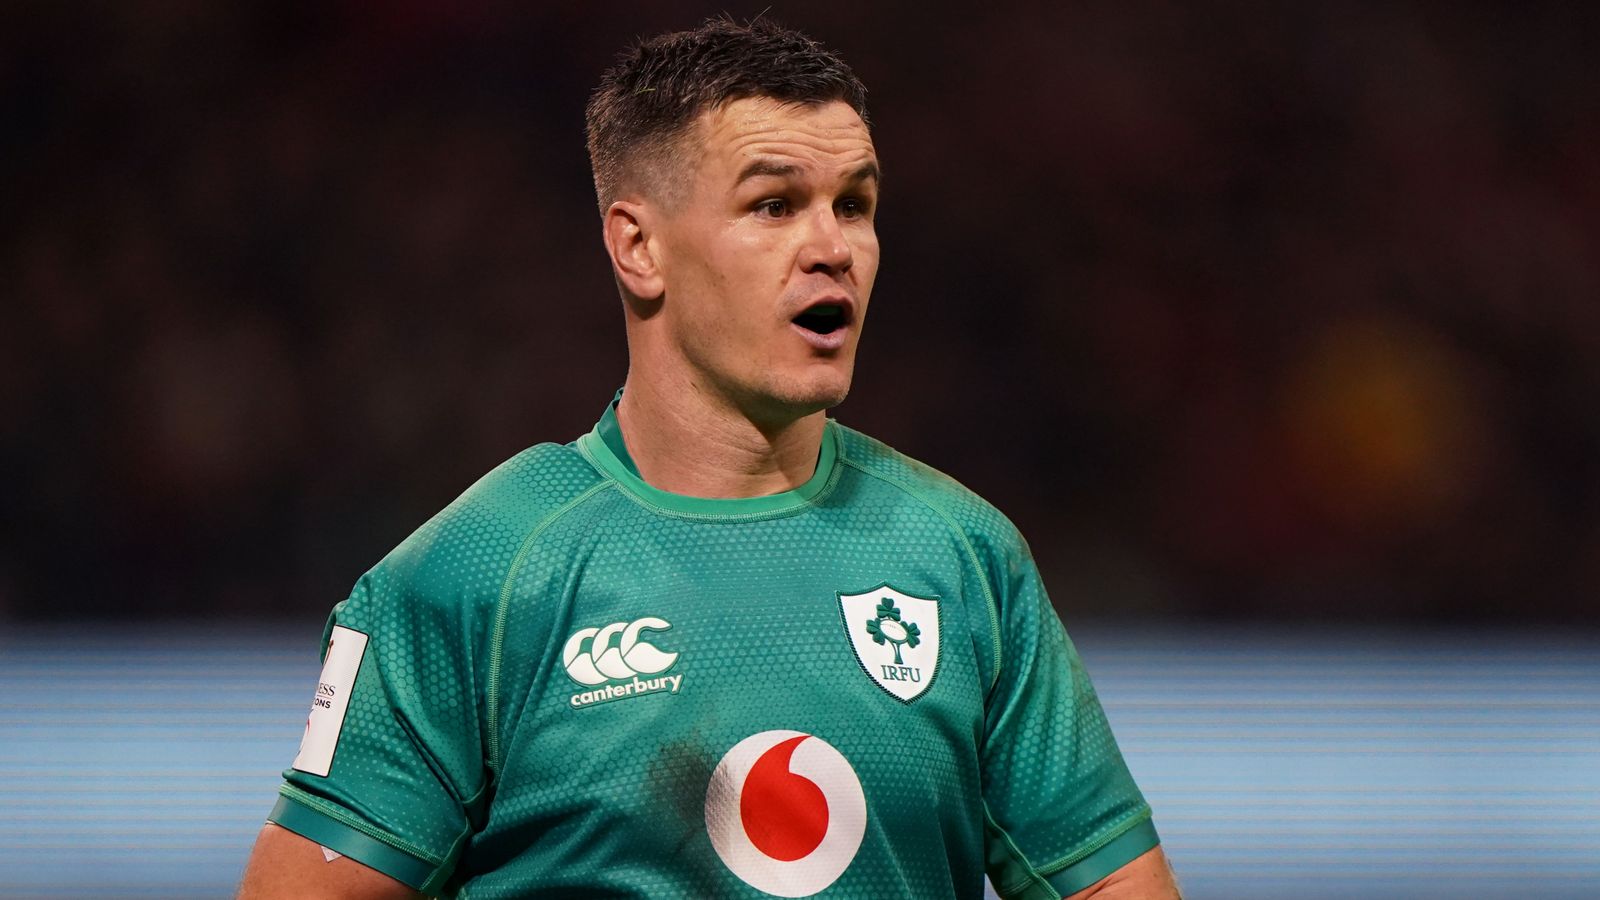 Six Nations: Ireland head coach Andy Farrell has no concerns over Johnny Sexton’s age after win over Wales